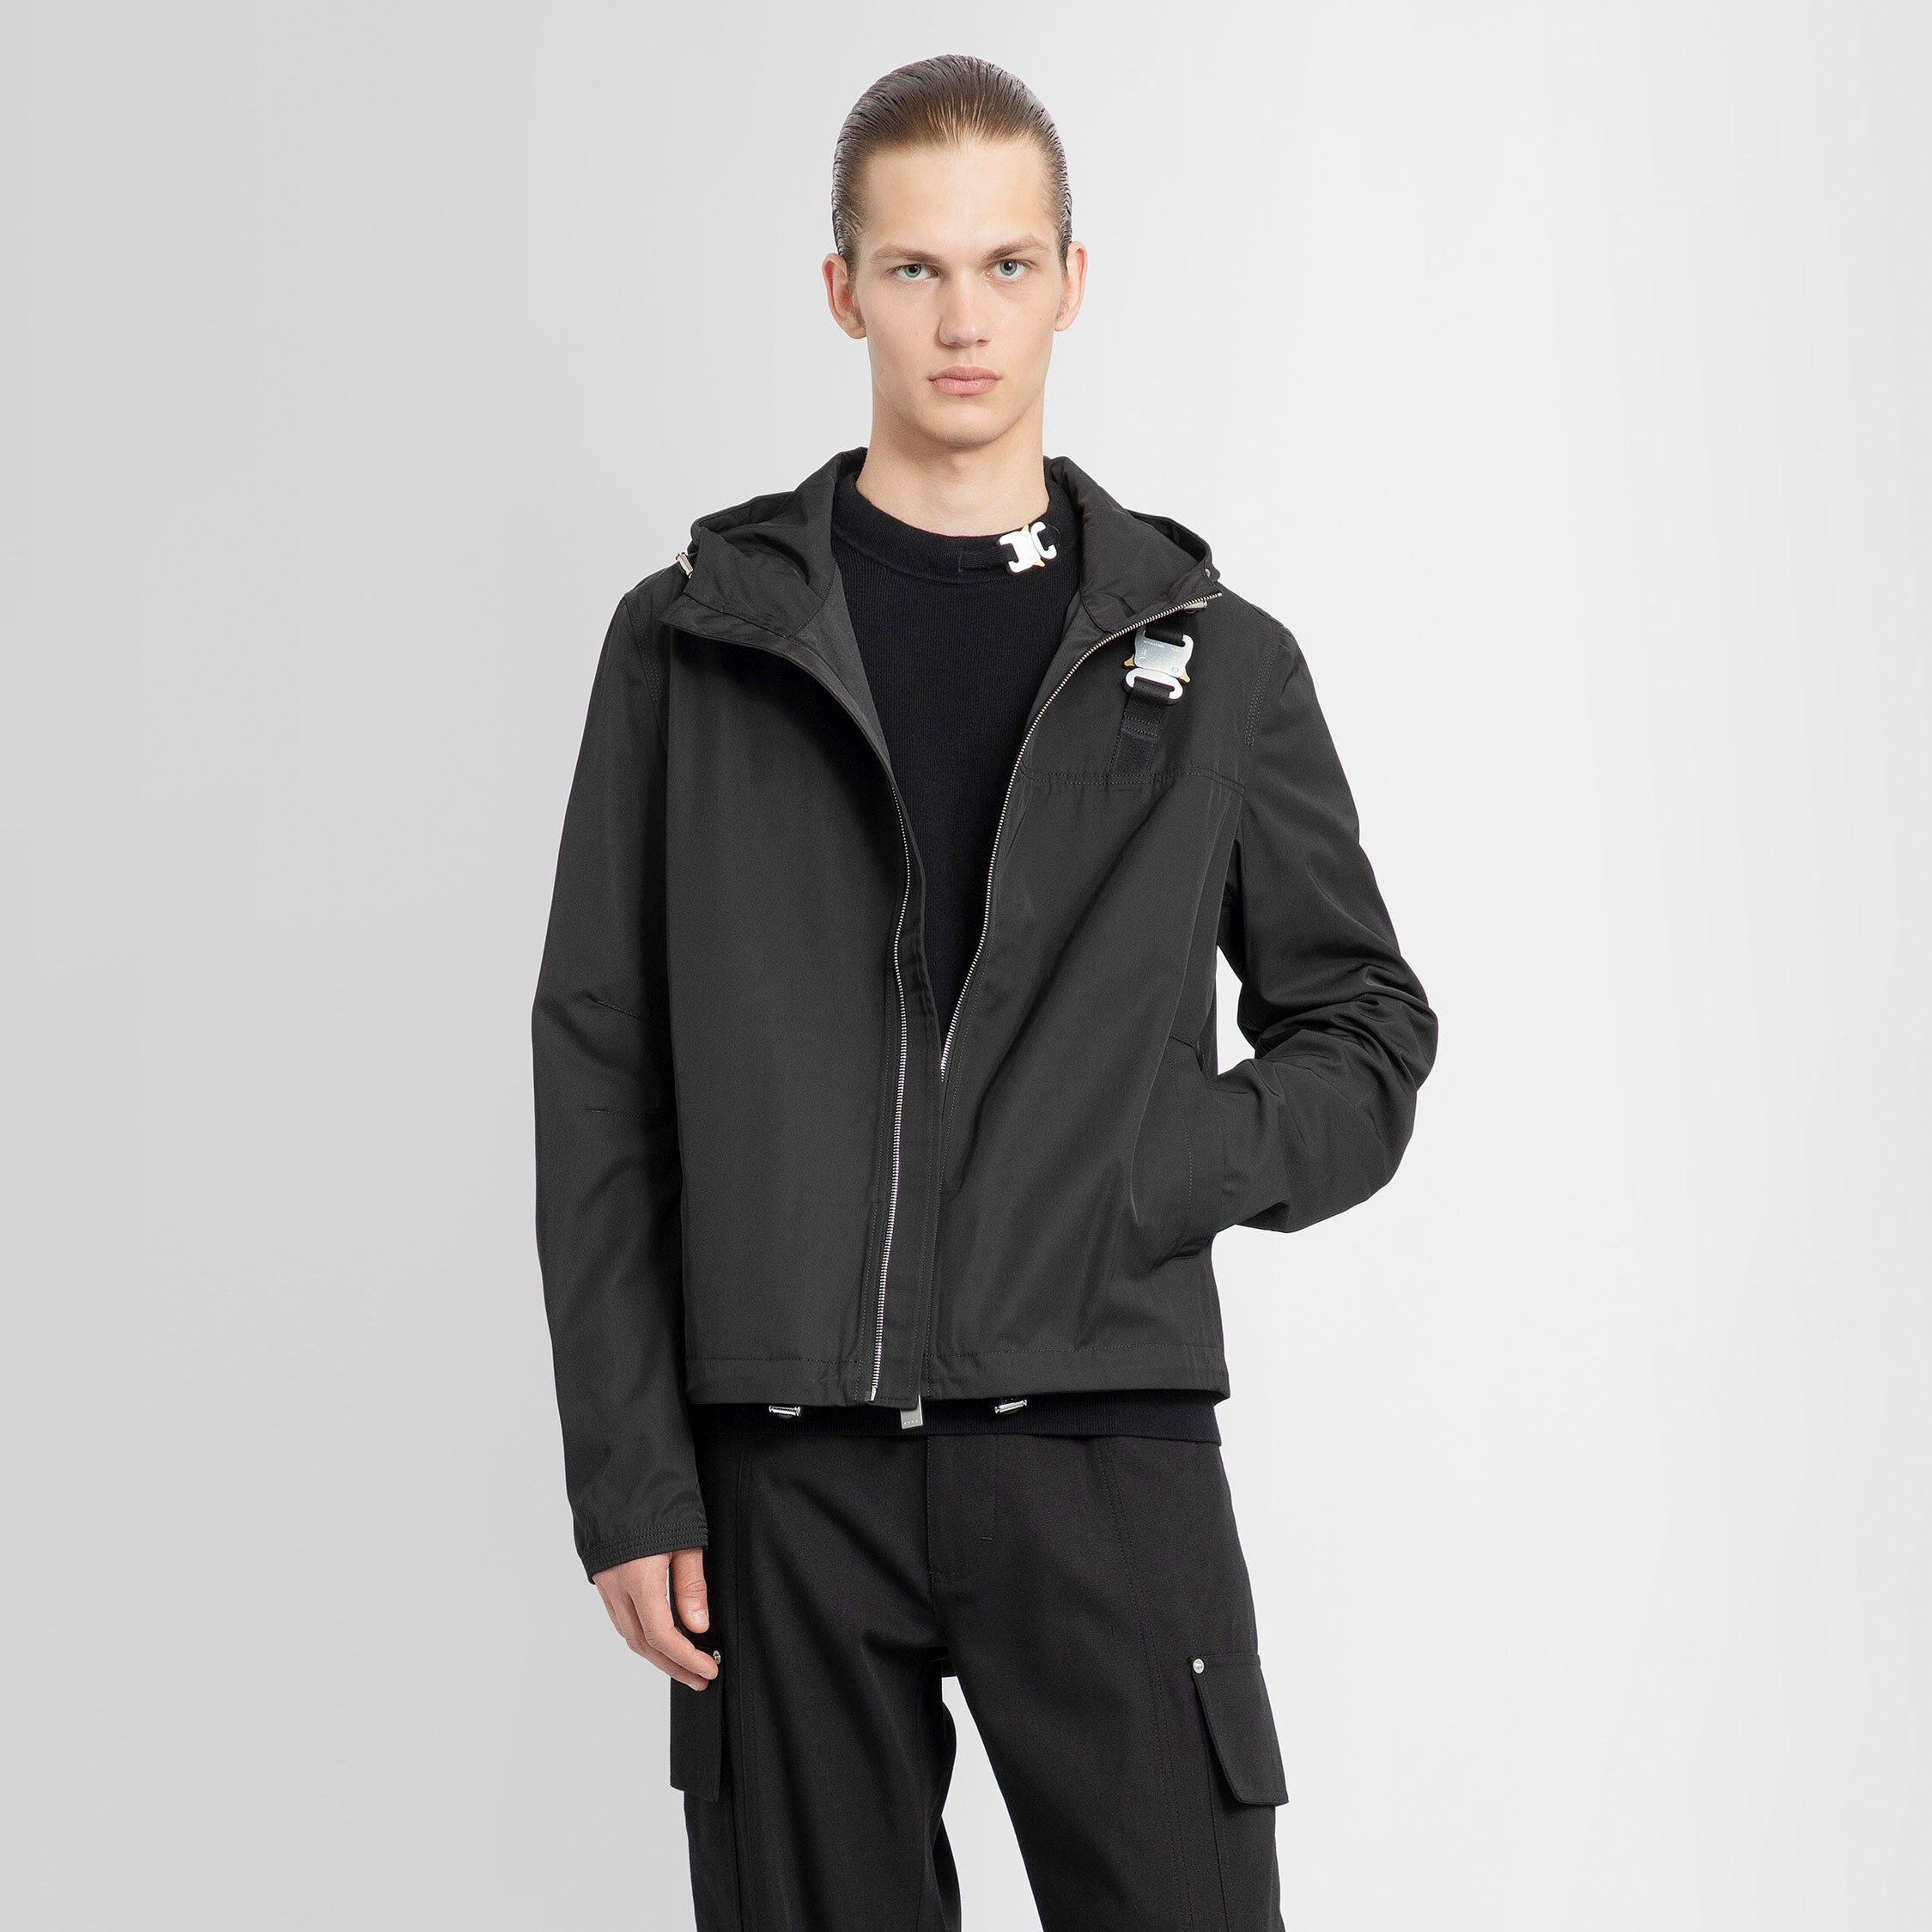 ALYX: jacket for man - Black  Alyx jacket AAMOU377FA01 online at